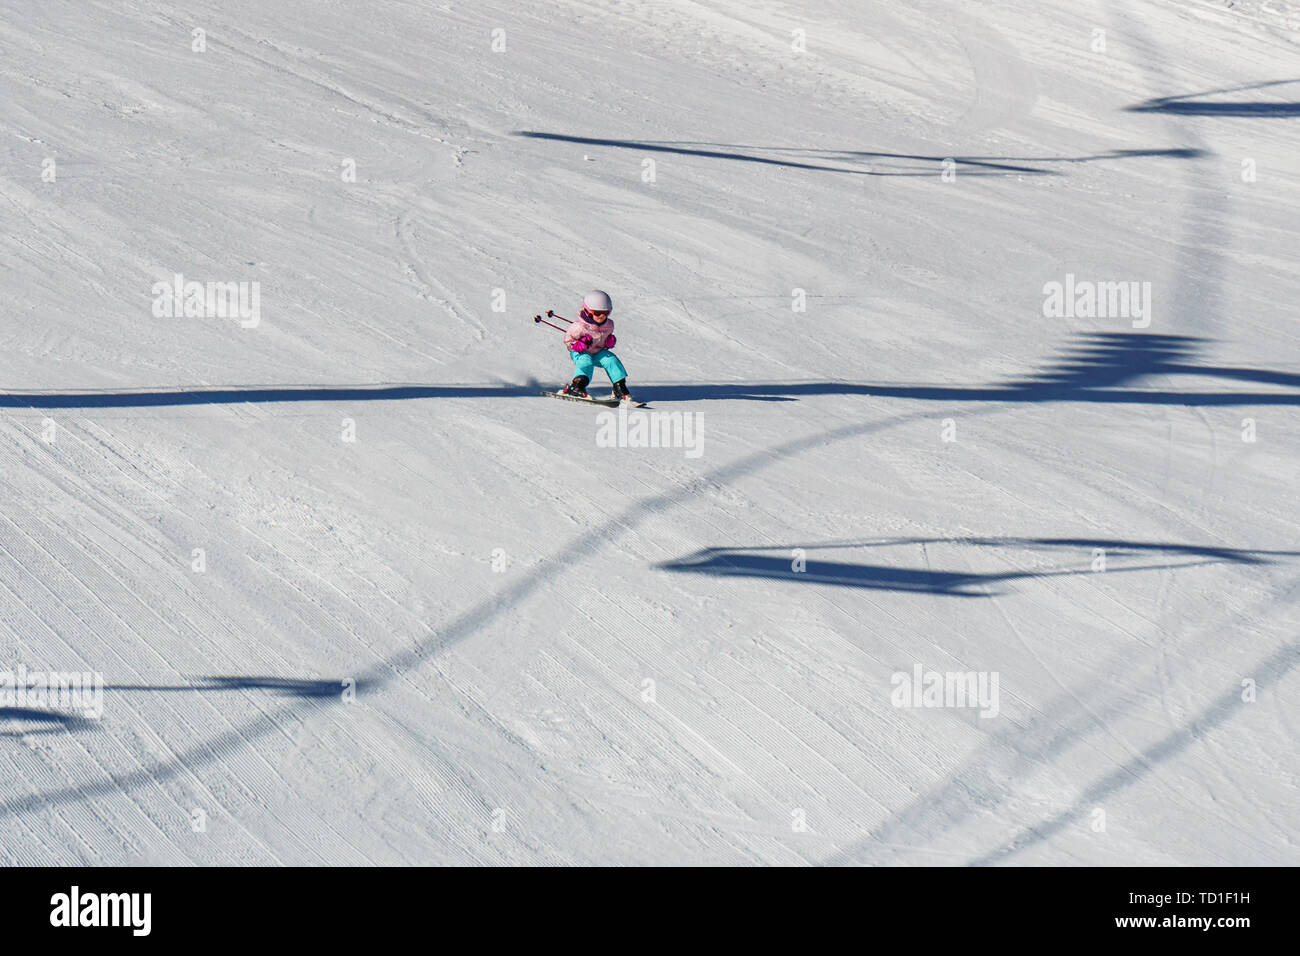 KIMBERLEY, CANADA - MARCH 22, 2019: Mountain Resort view early spring child skiing. Stock Photo